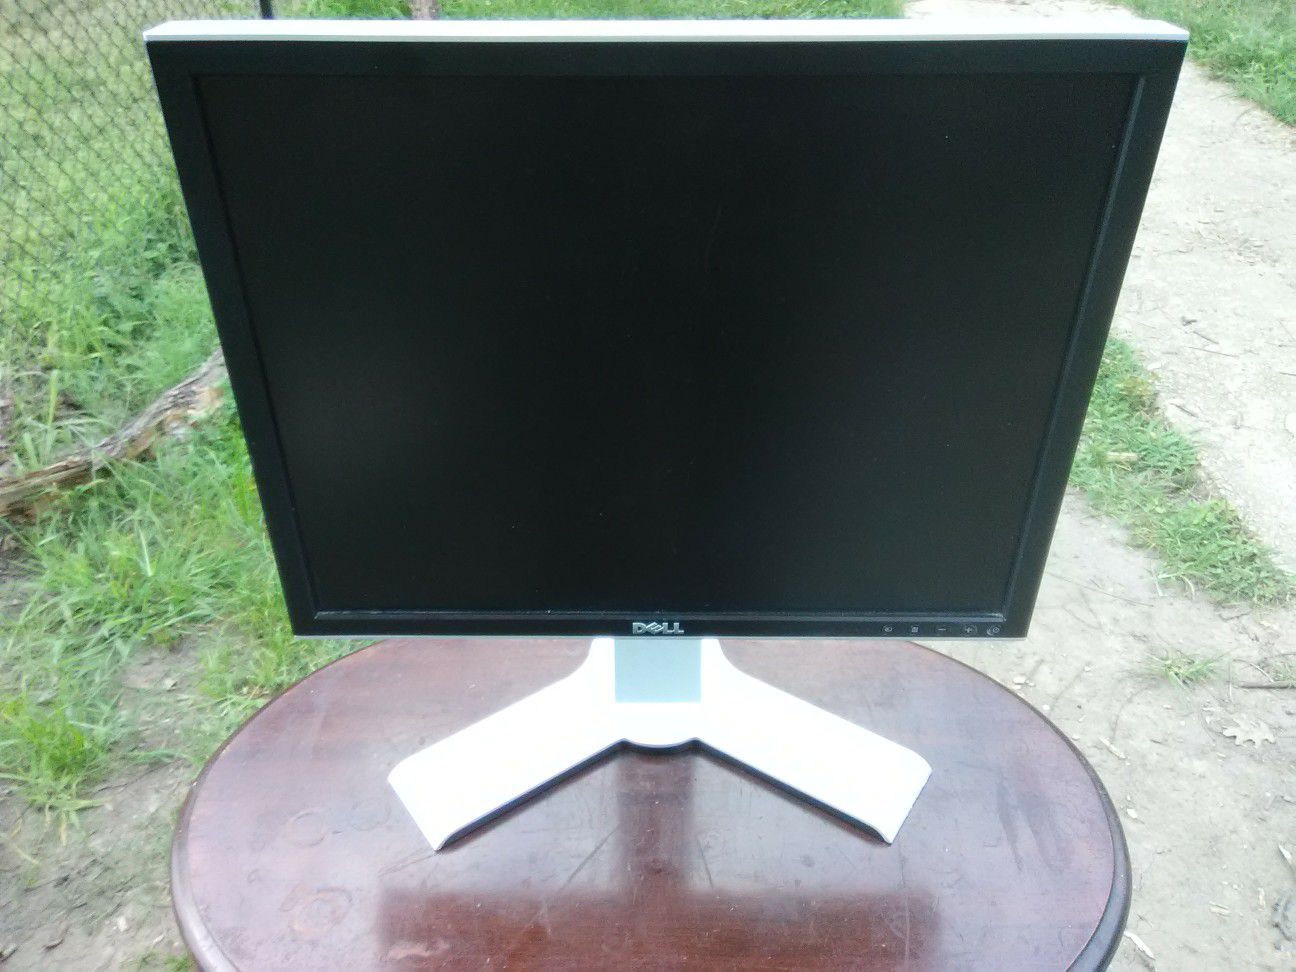 Dell 22 inch monitor with video, DVI and PC ports NO CORDS ARE INCLUDED